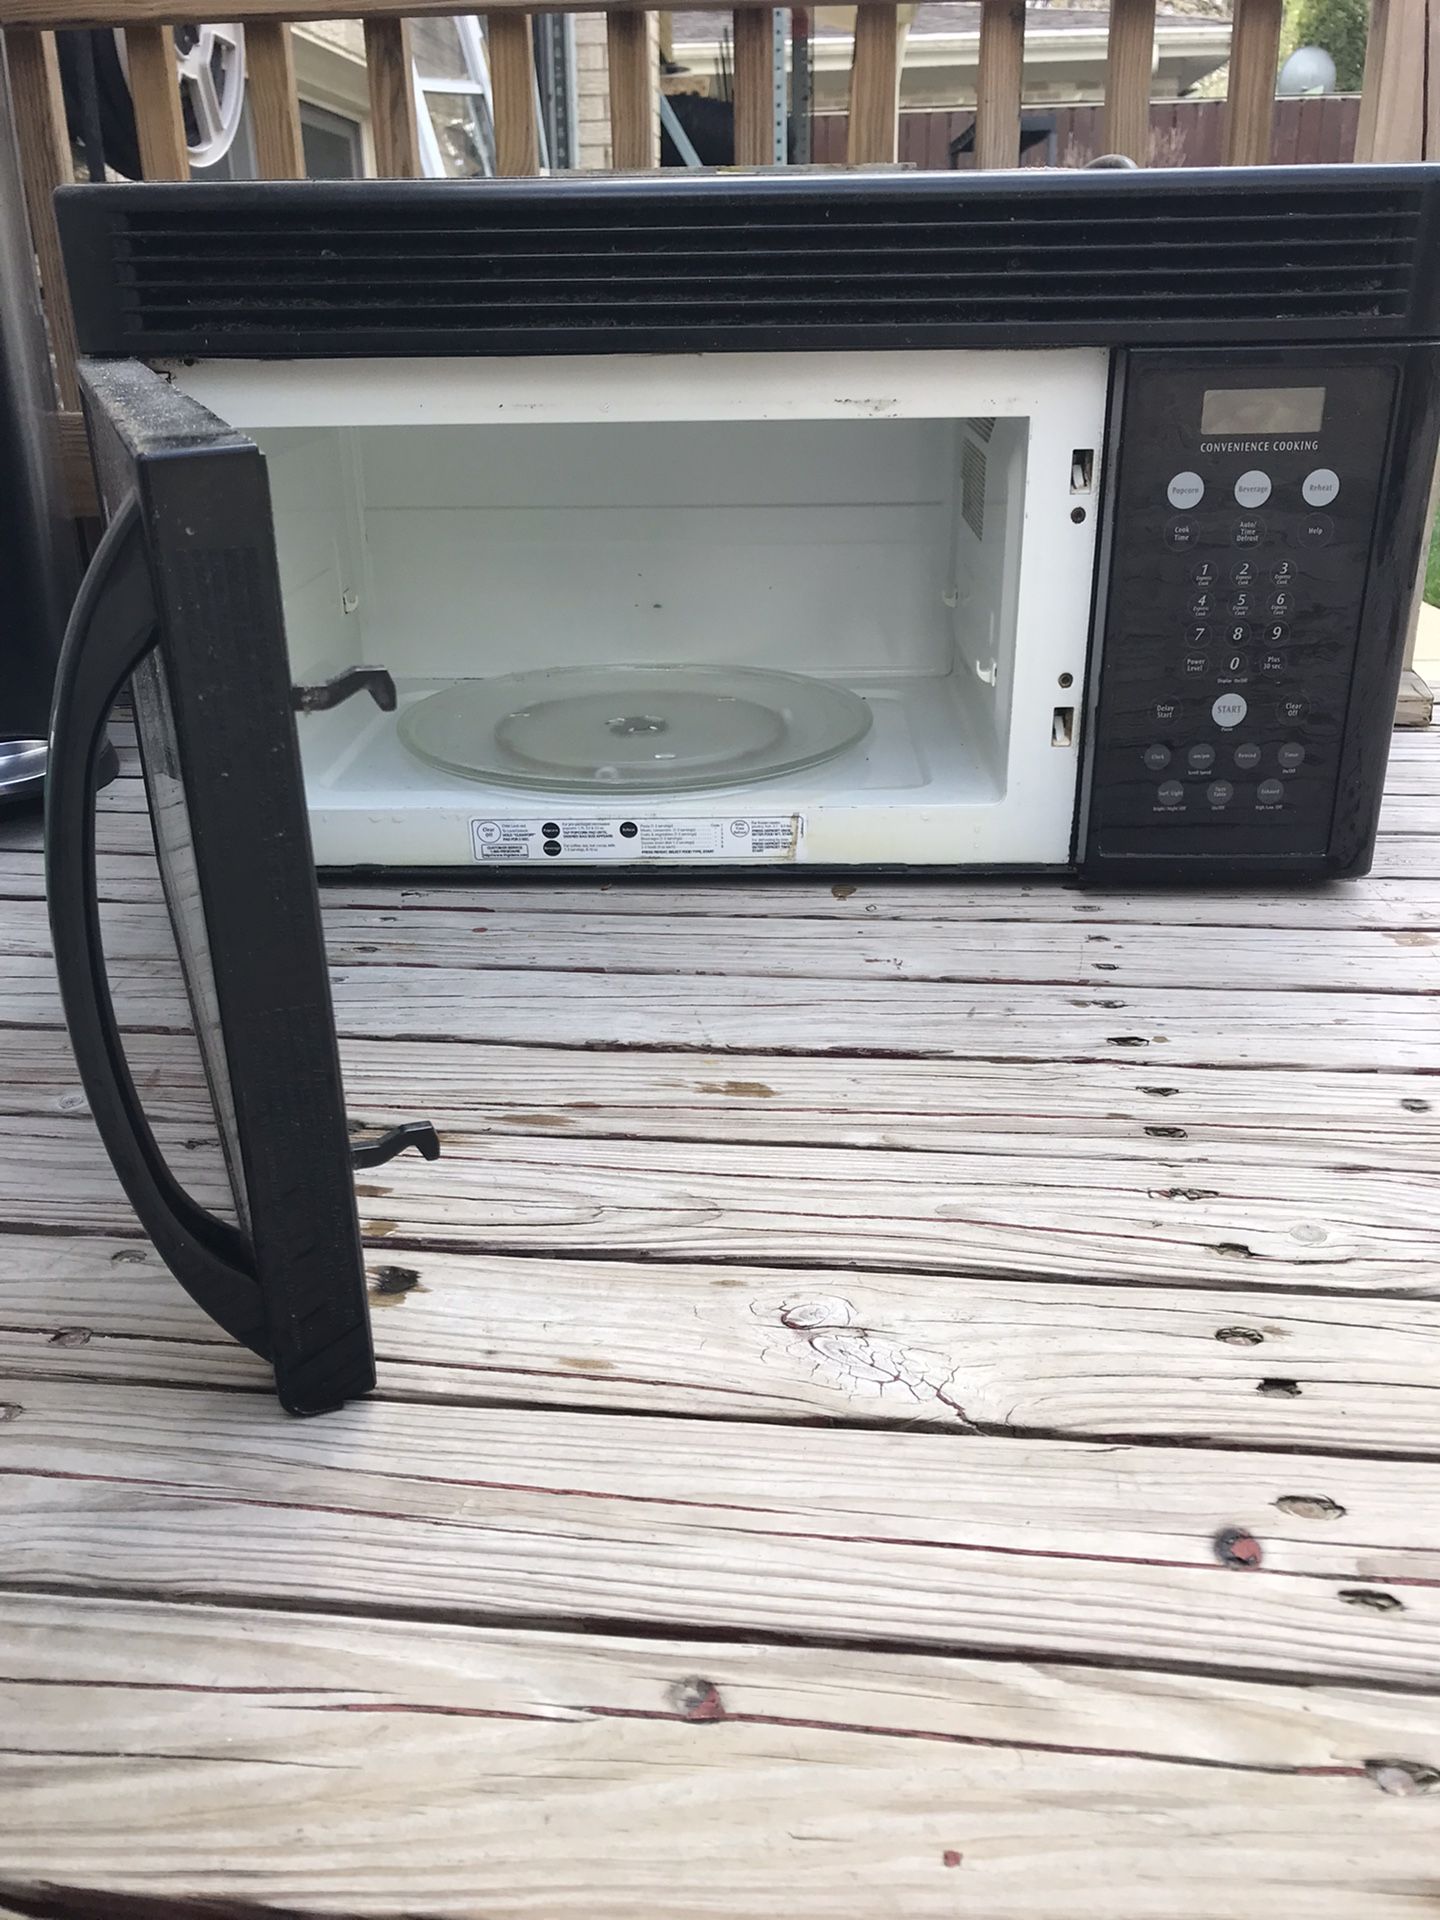 Microwave for FREE.